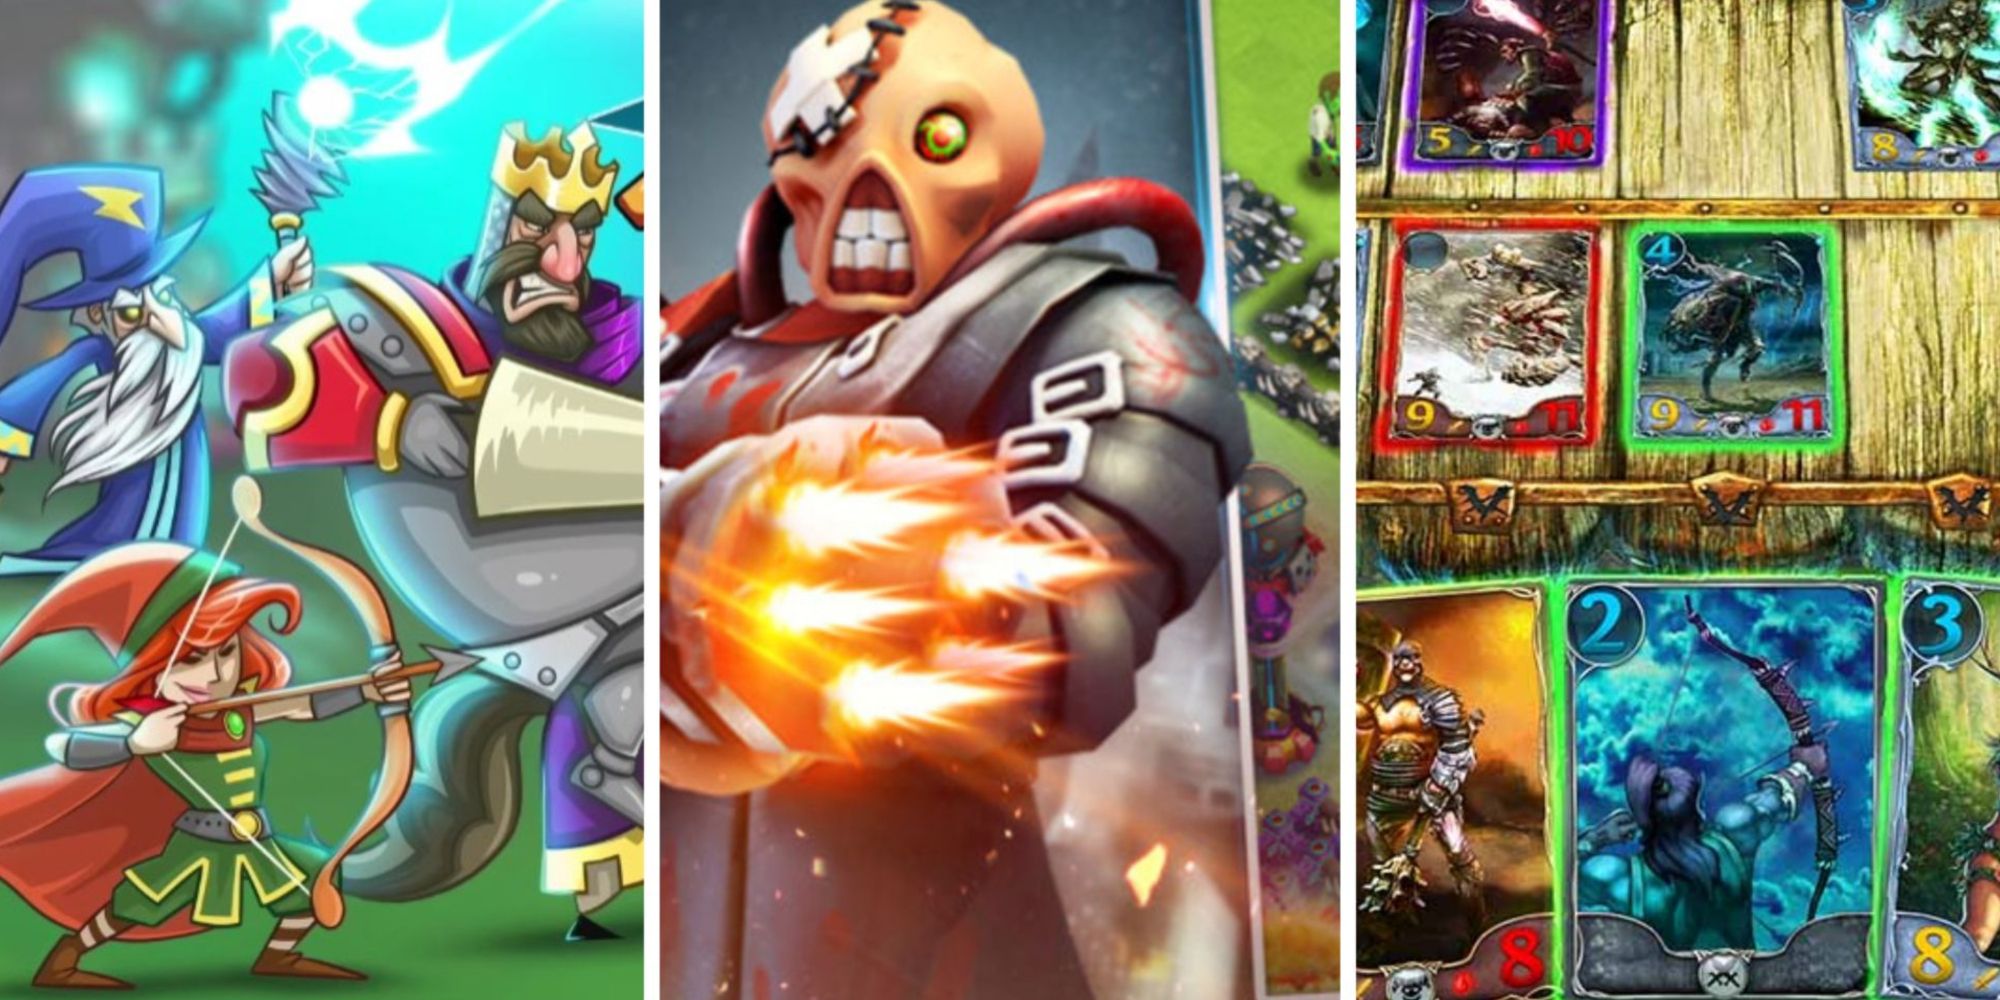 Mobile games like Clash Royale featured image